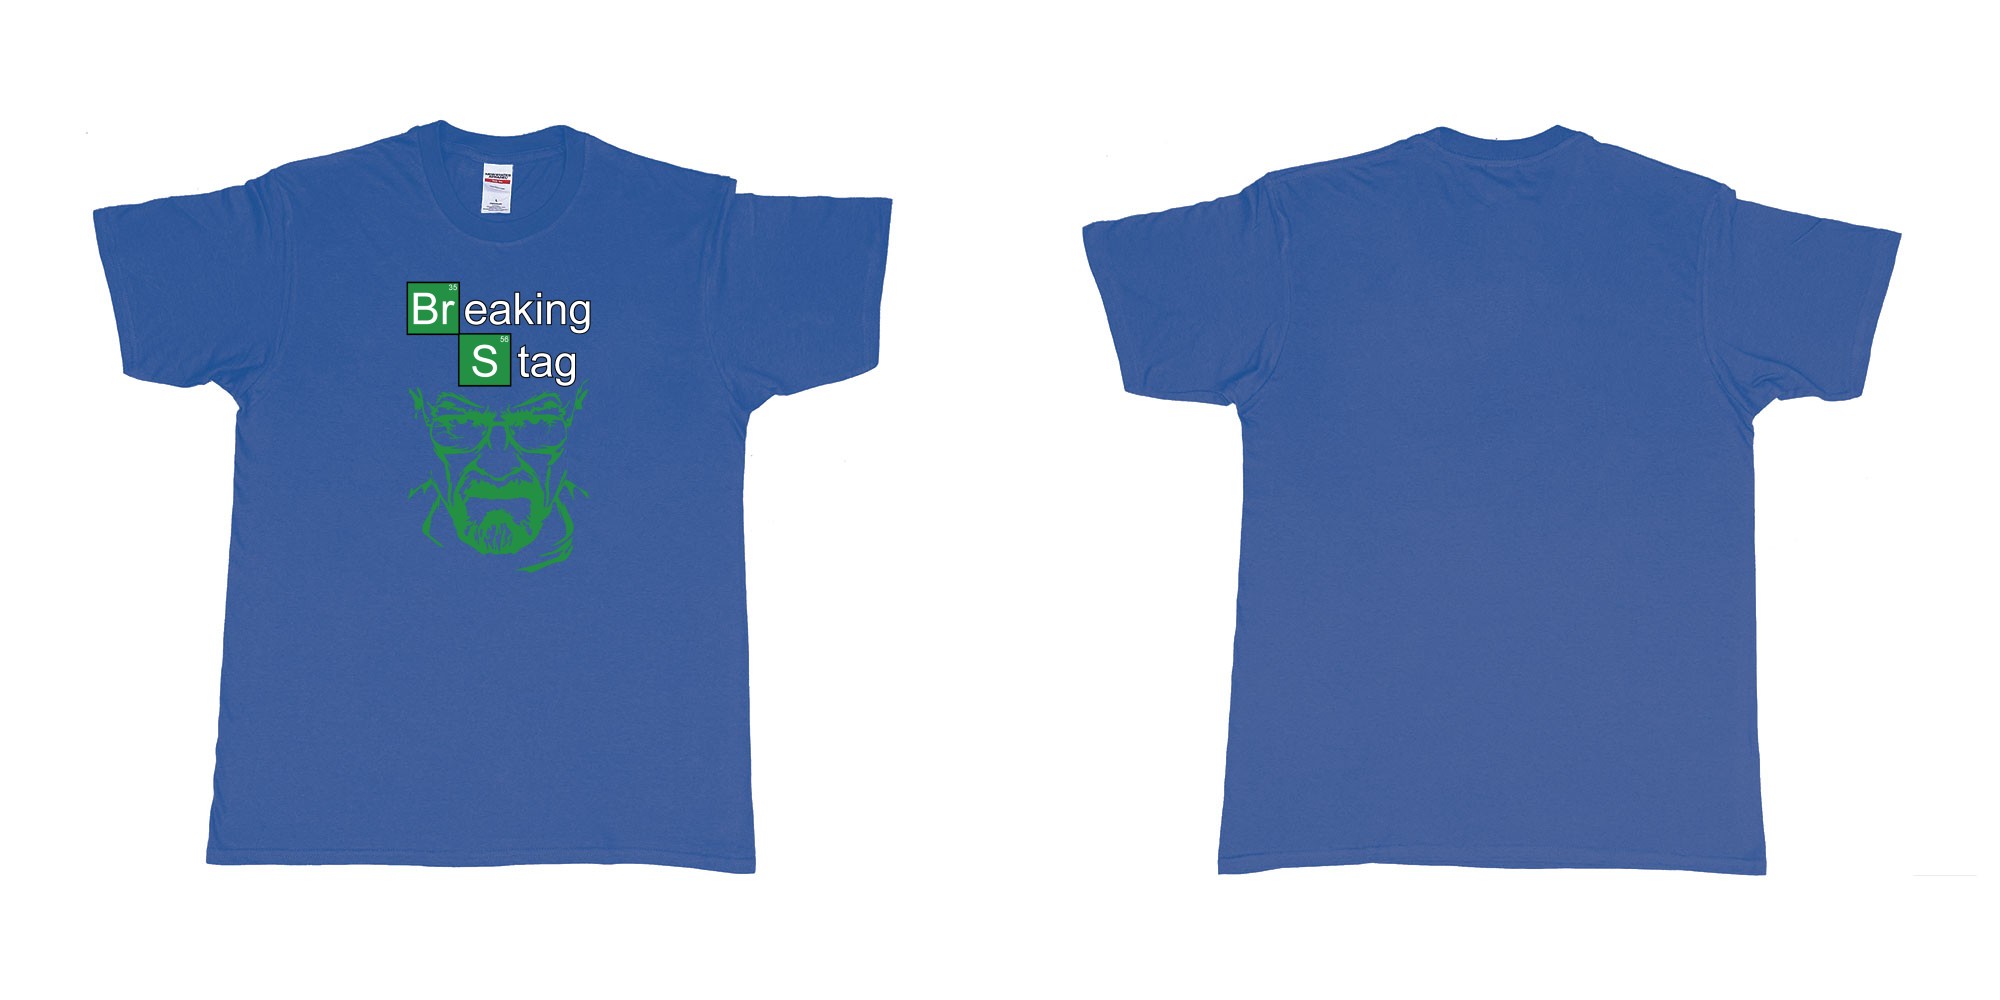 Custom tshirt design TPW Braking Bad Stag in fabric color royal-blue choice your own text made in Bali by The Pirate Way